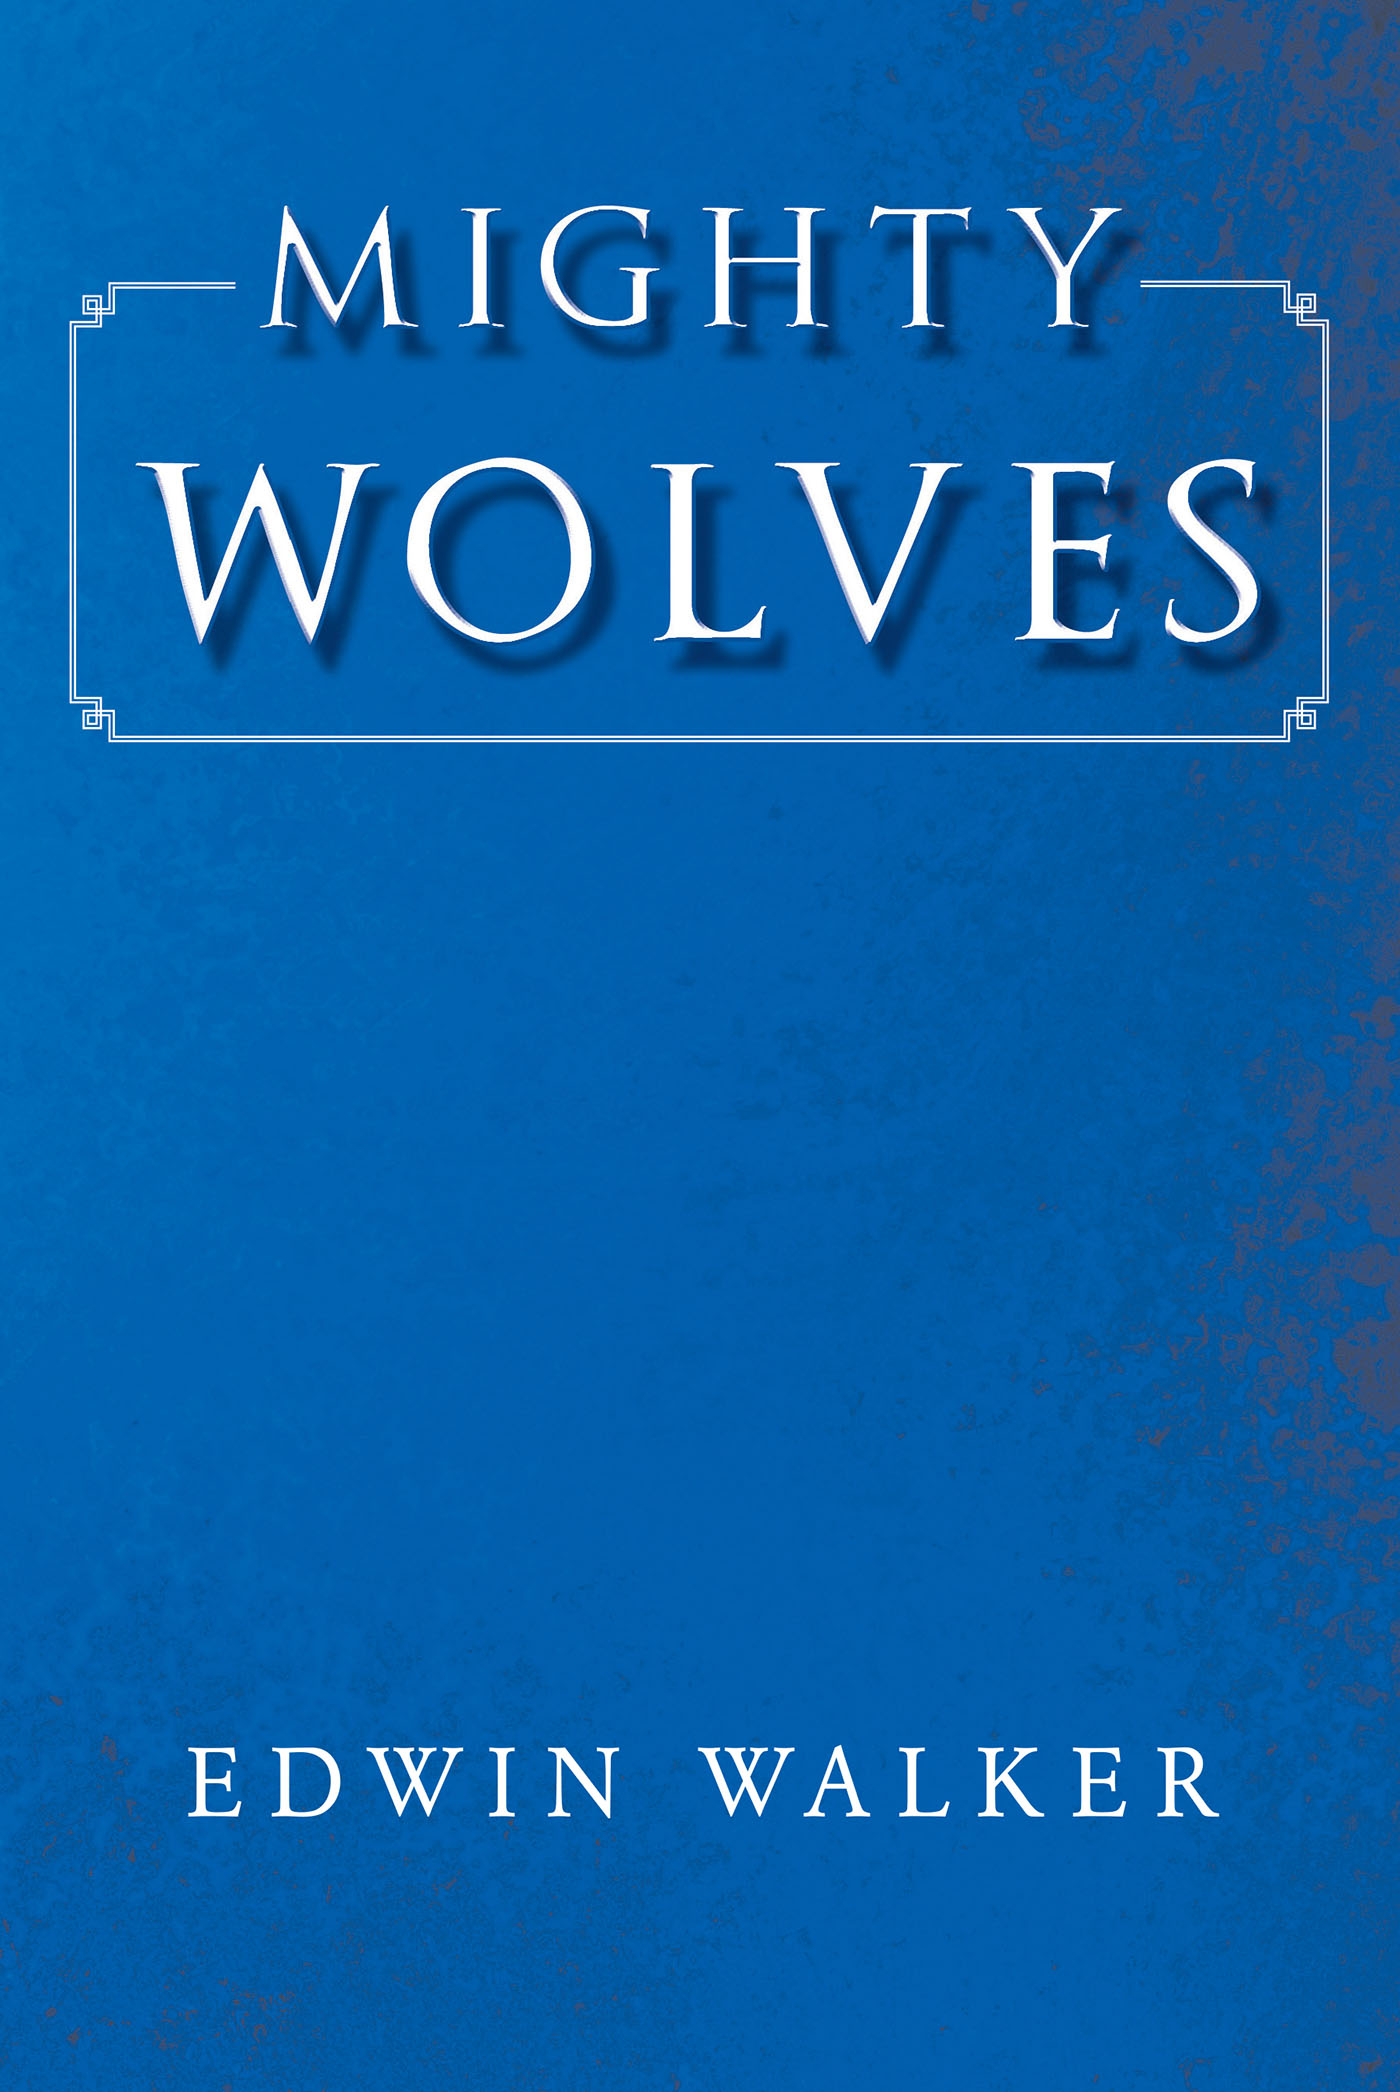 Author Edwin Walker’s New Book, "Mighty Wolves," is a Glowing History of the Basketball Program at What is Now Known as Cheyney University in Pennsylvania